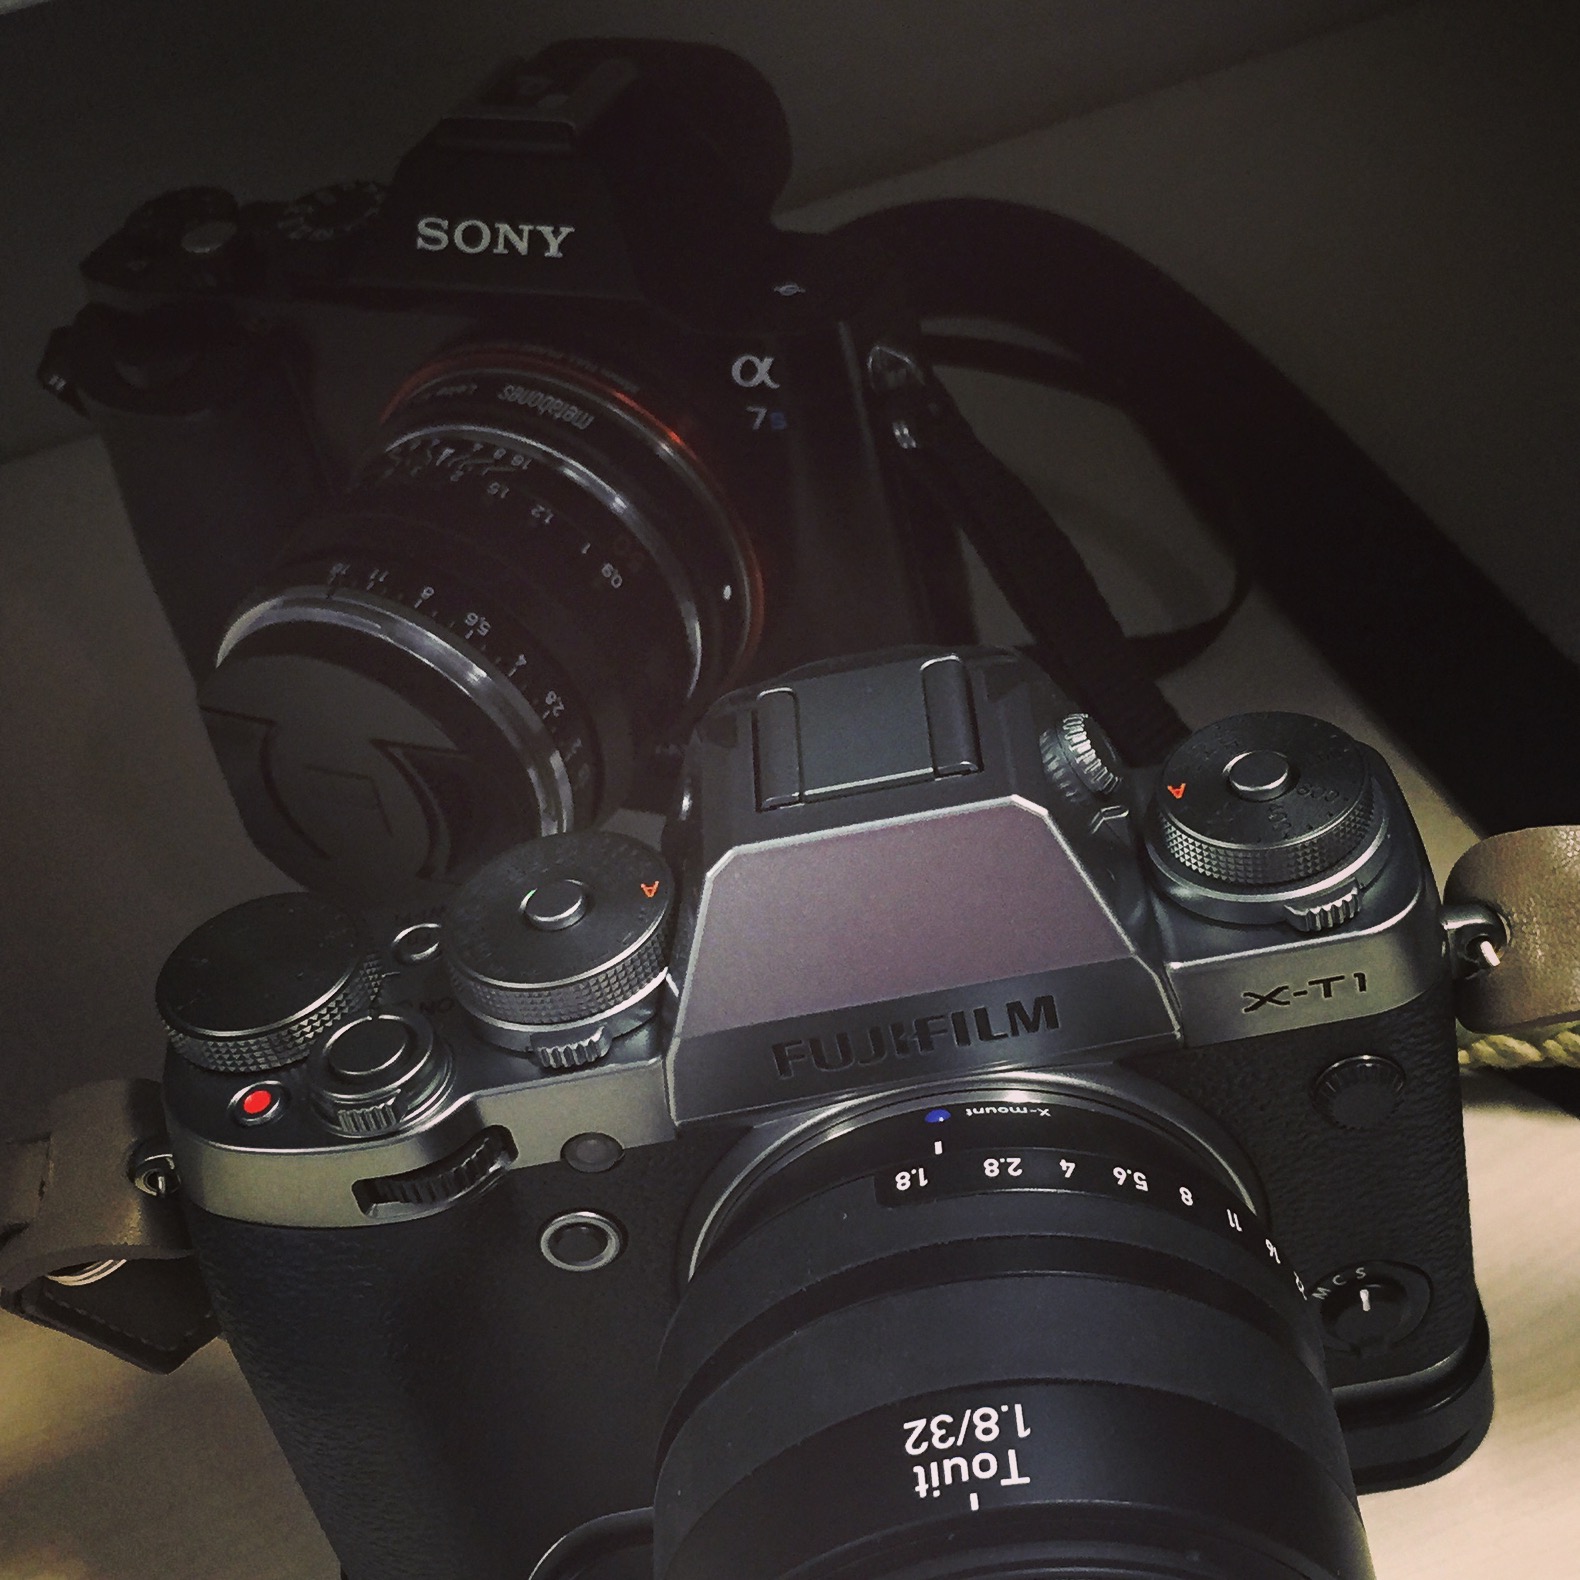 Fujit XT1 Graphite silver edition and Sony a7s with Carl Zeiss lenses